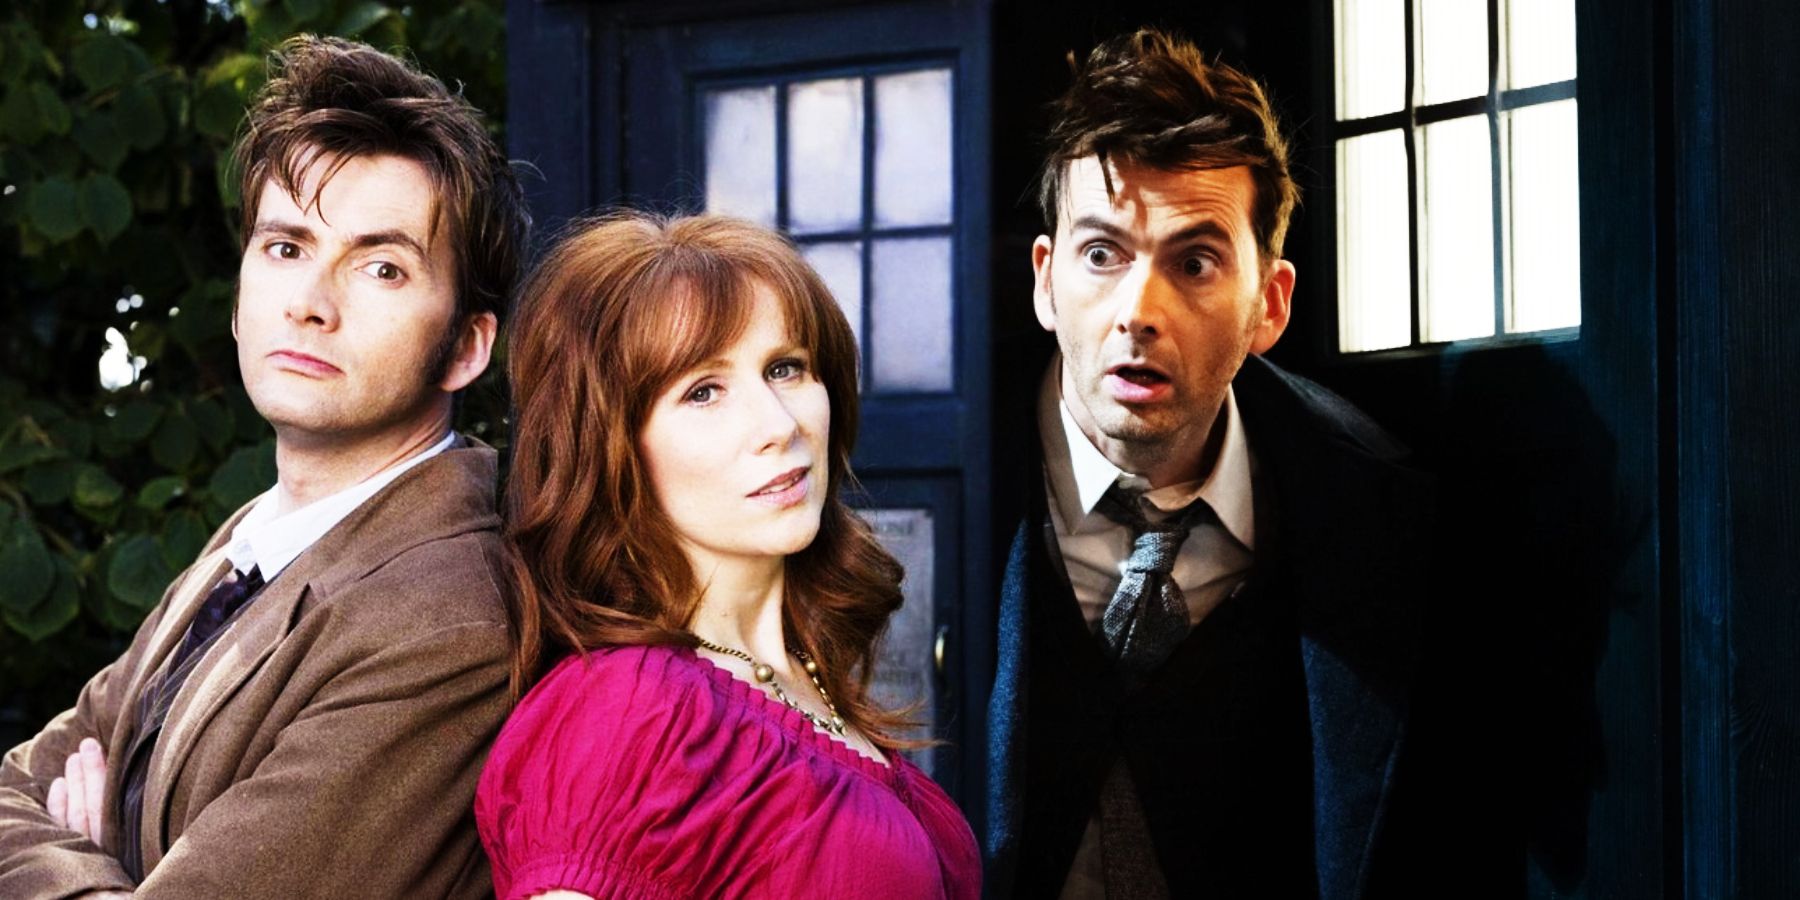 David Tennant and Catherine Tate in 2007 and David Tennant in 2022